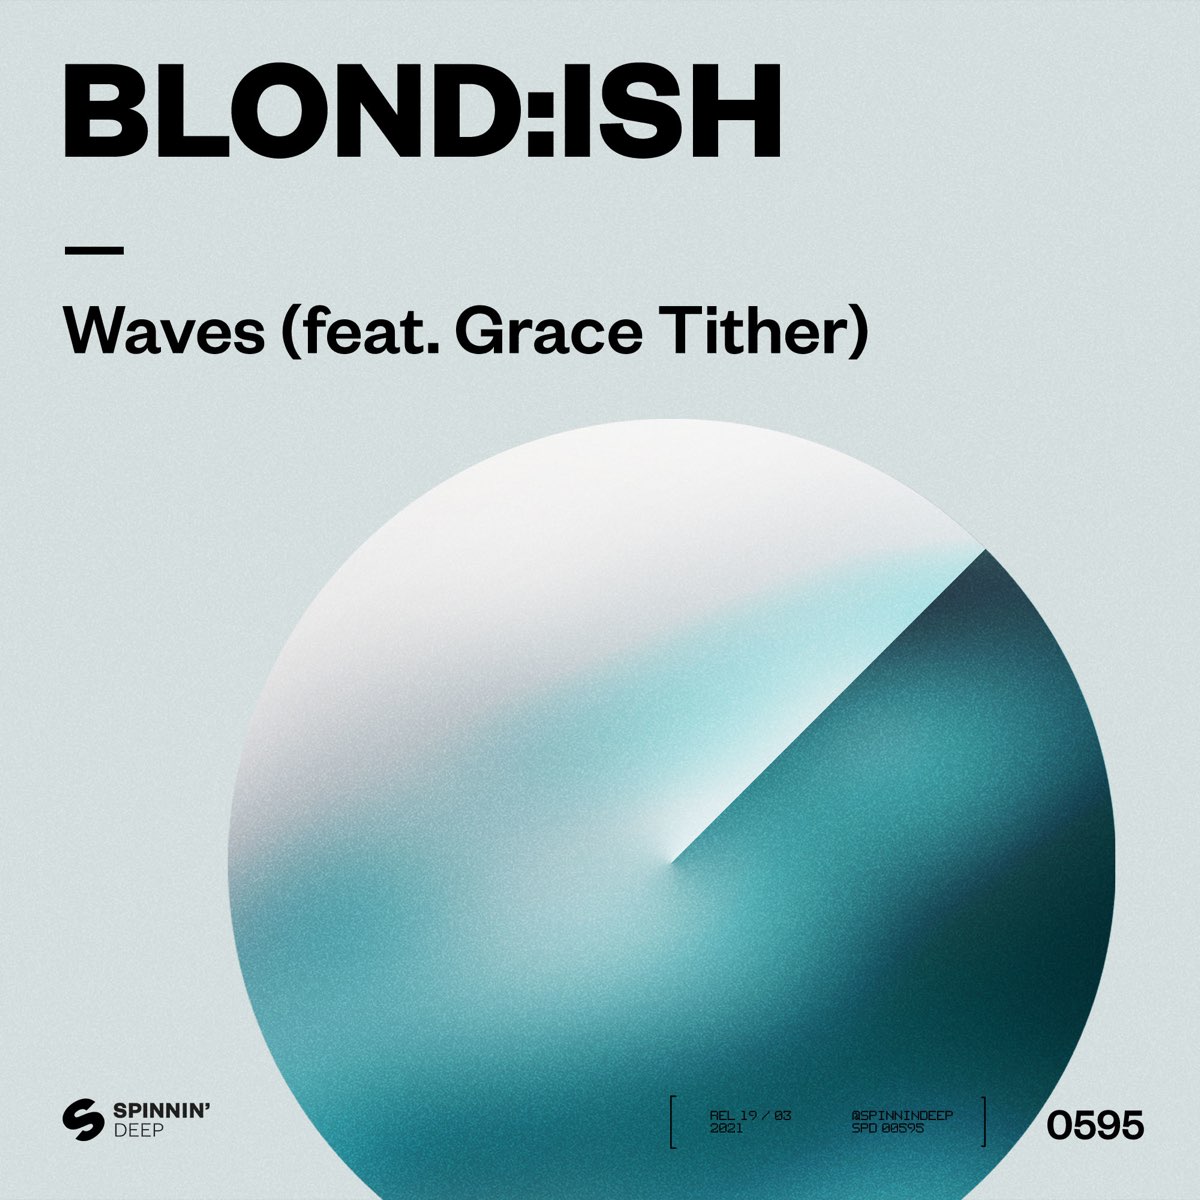 Waves feat. Grace Tither. Definition, Thomas Gandey - paper connection.